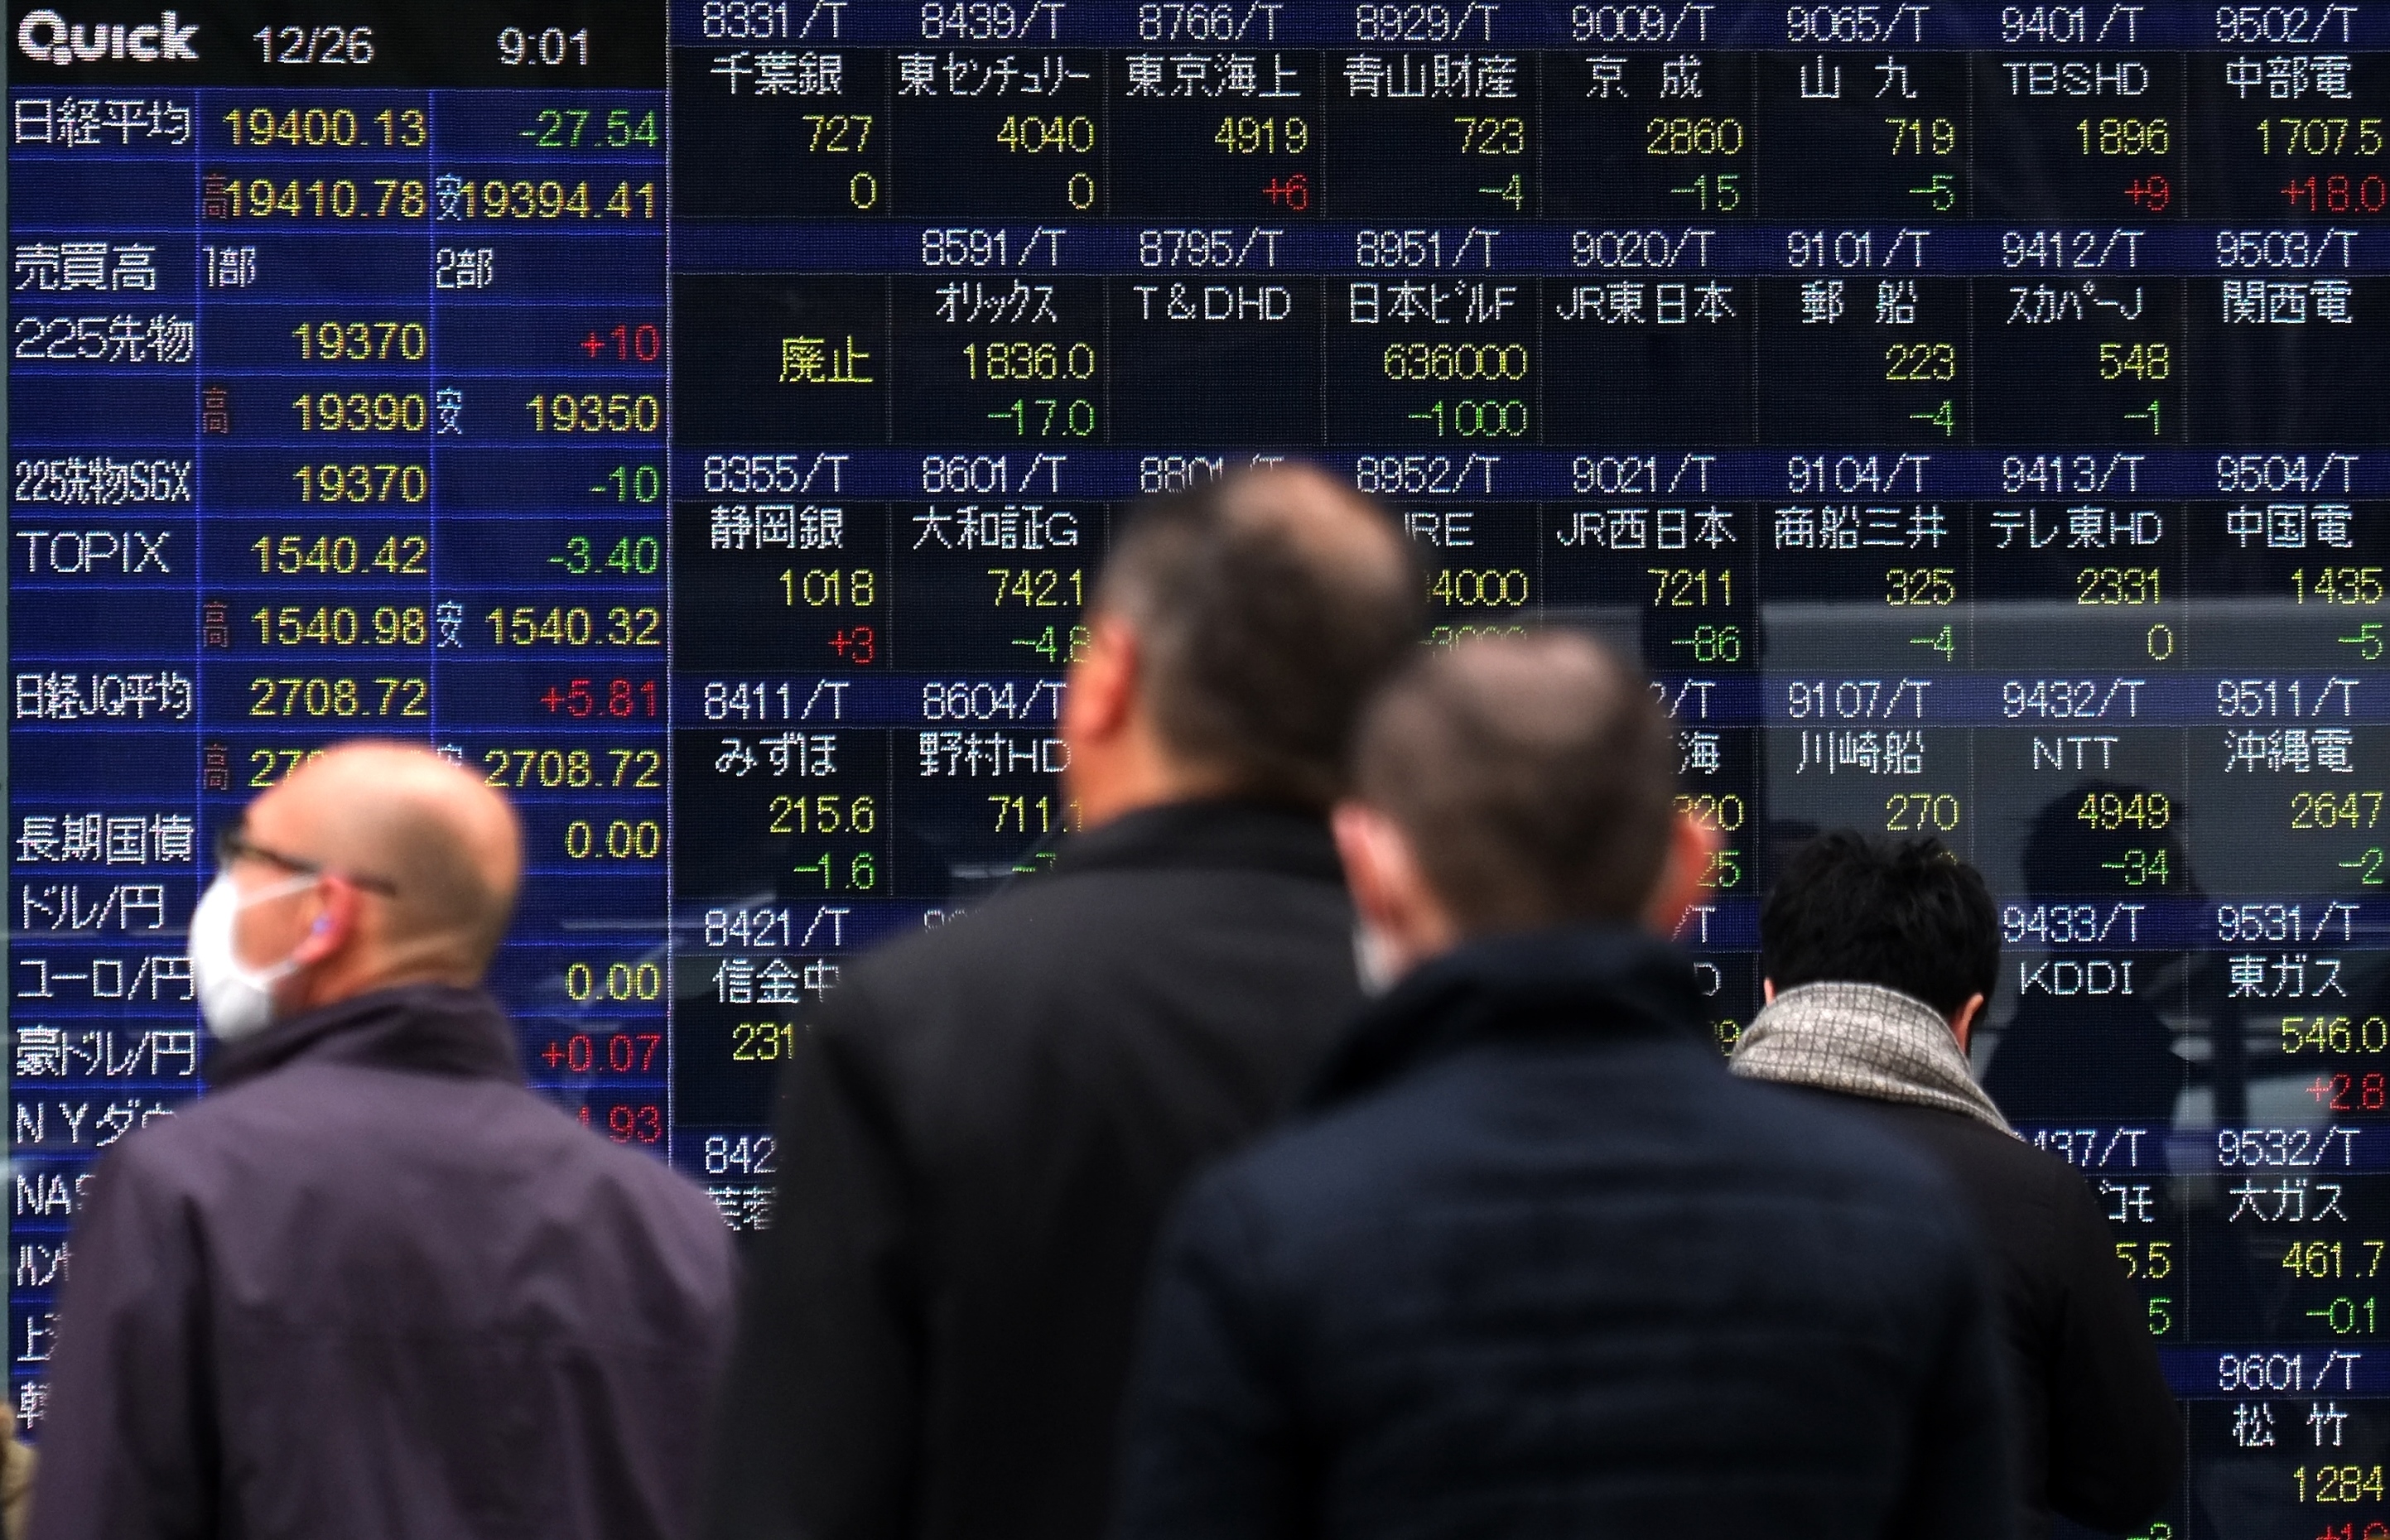 Pedestrians walk in front of an electronic board displaying stock prices on the Tokyo Stock Exchange in Tokyo on December 26, 2016. / AFP PHOTO / KAZUHIRO NOGI